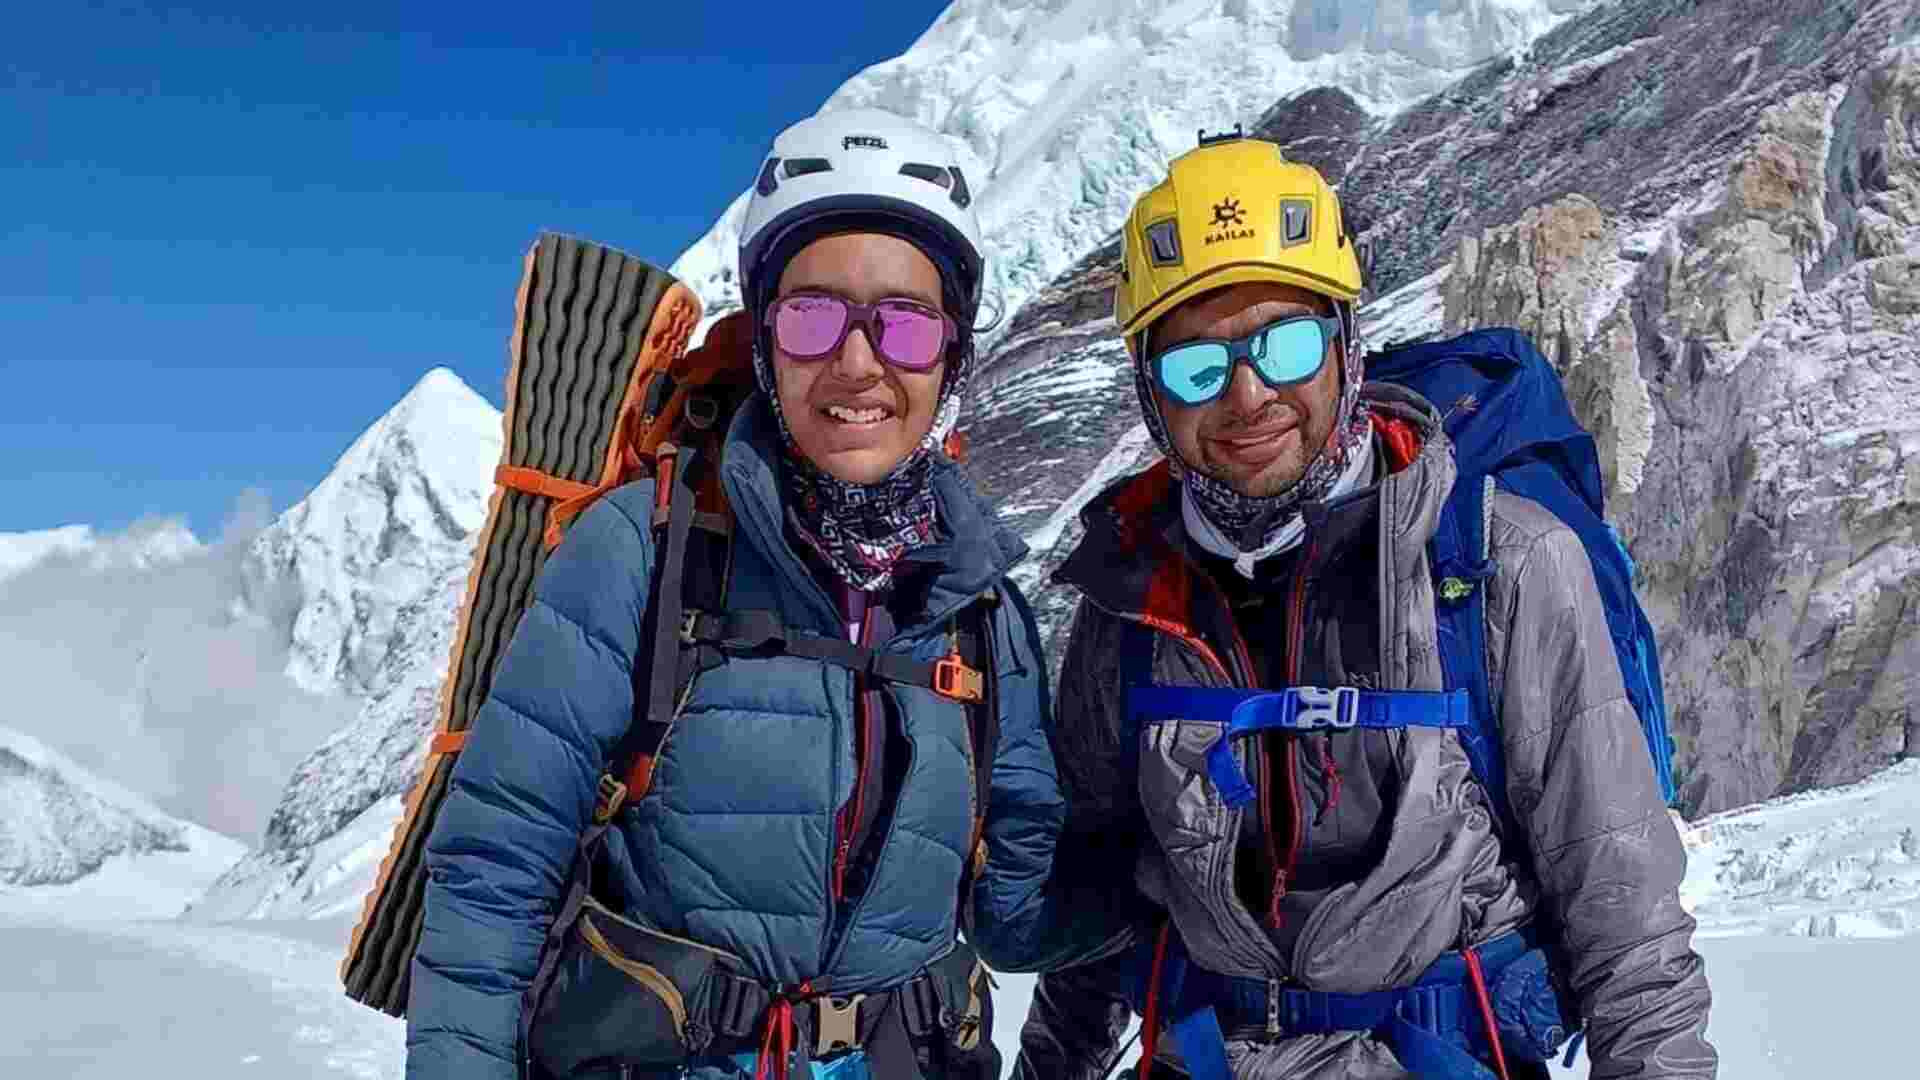 16-Year-Old Kaamya Karthikeyan Becomes The Youngest To Scale Mt Everest